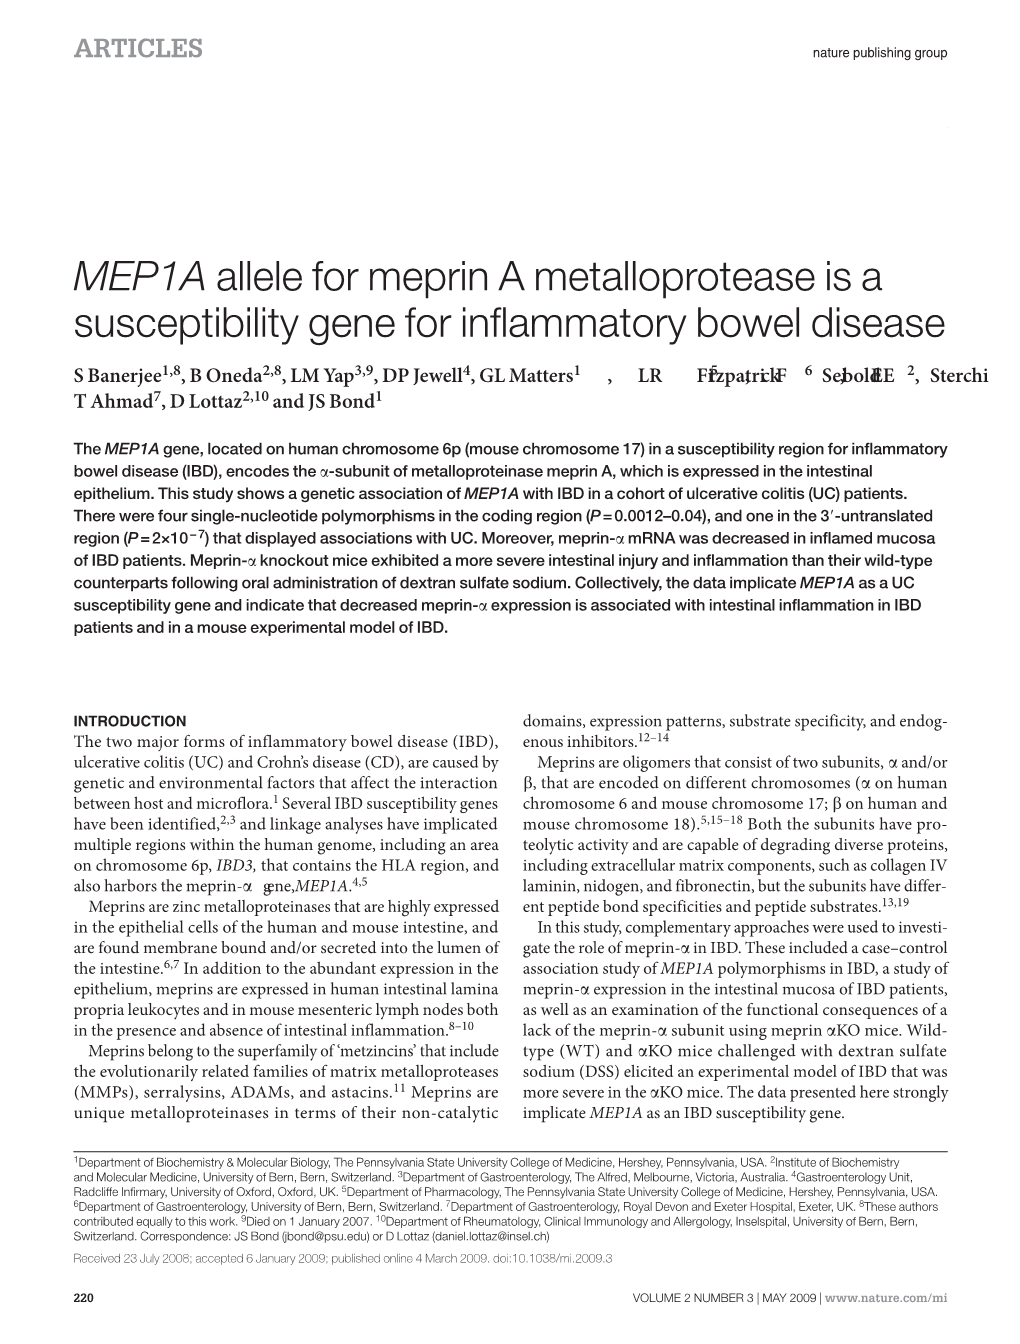 MEP1A Allele for Meprin a Metalloprotease Is a Susceptibility Gene for Inflammatory Bowel Disease